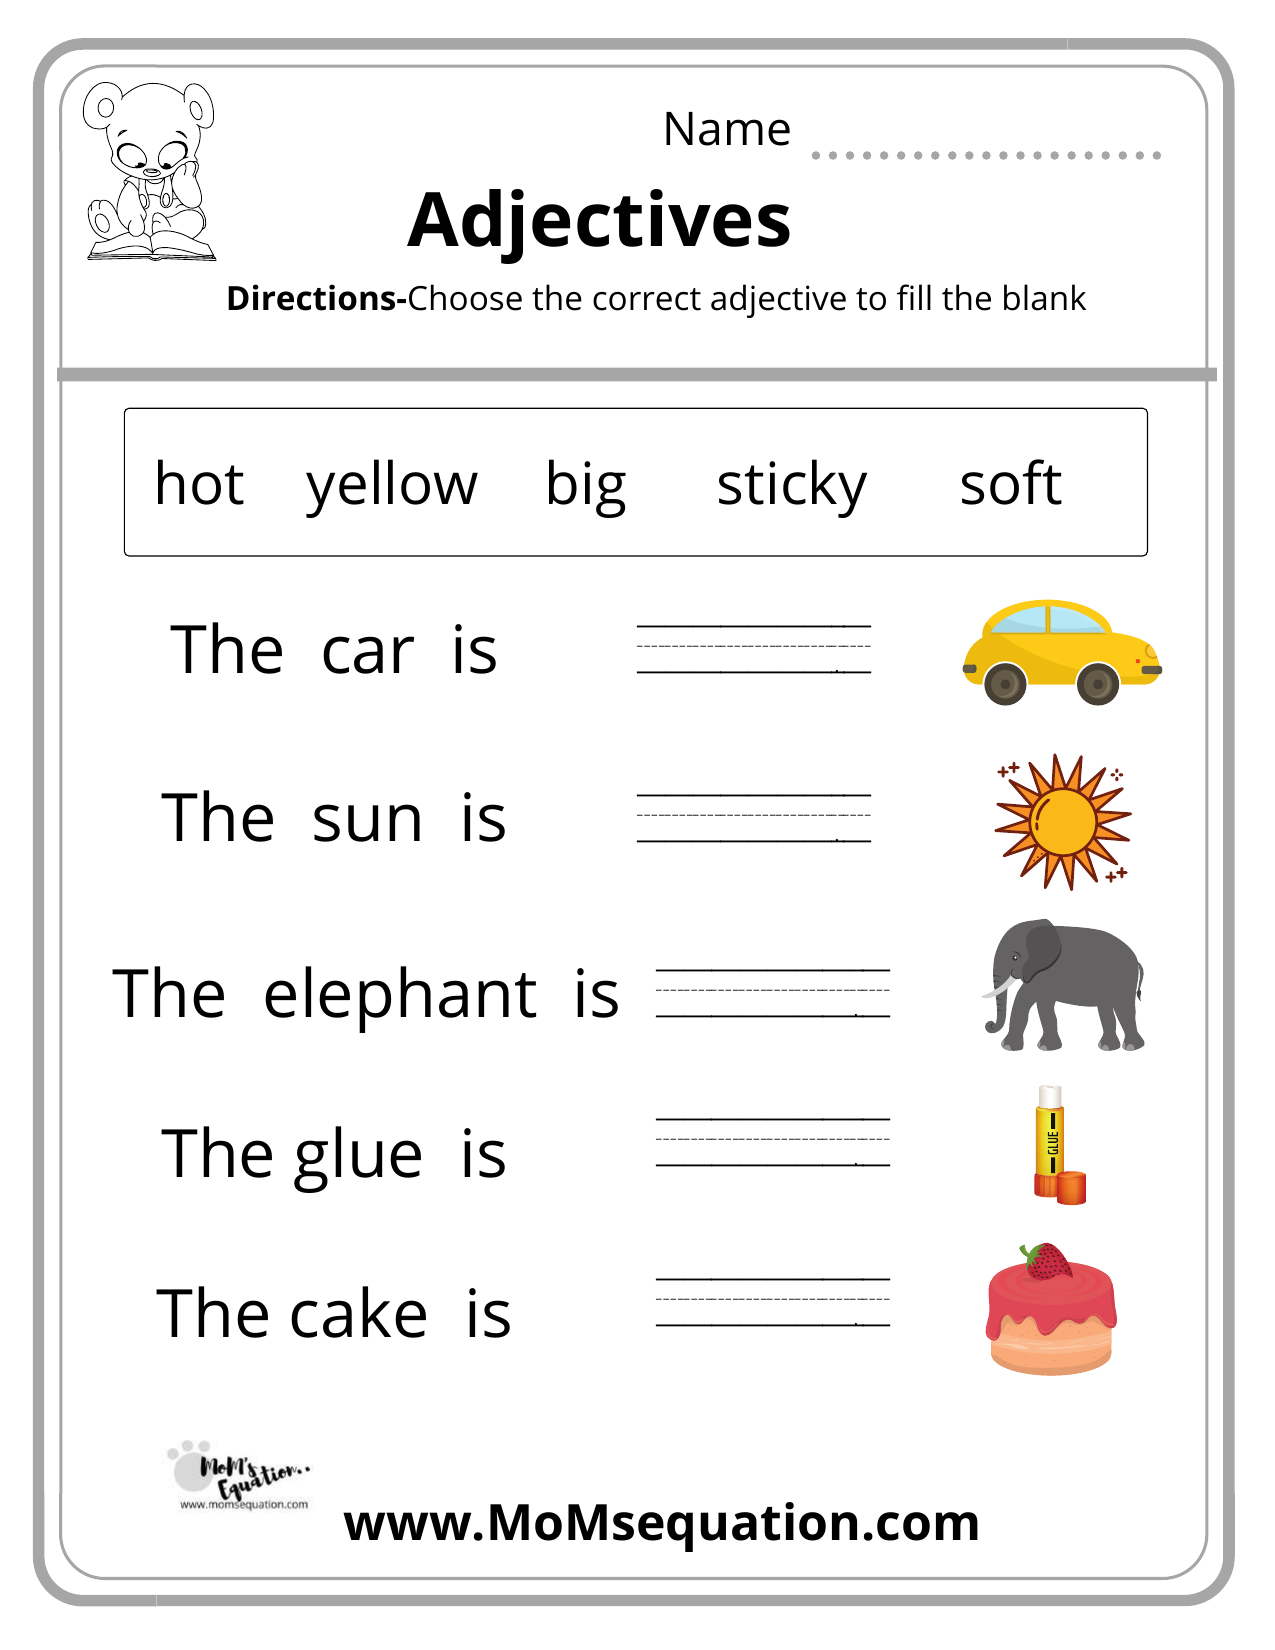 adjectives-coloring-sheet